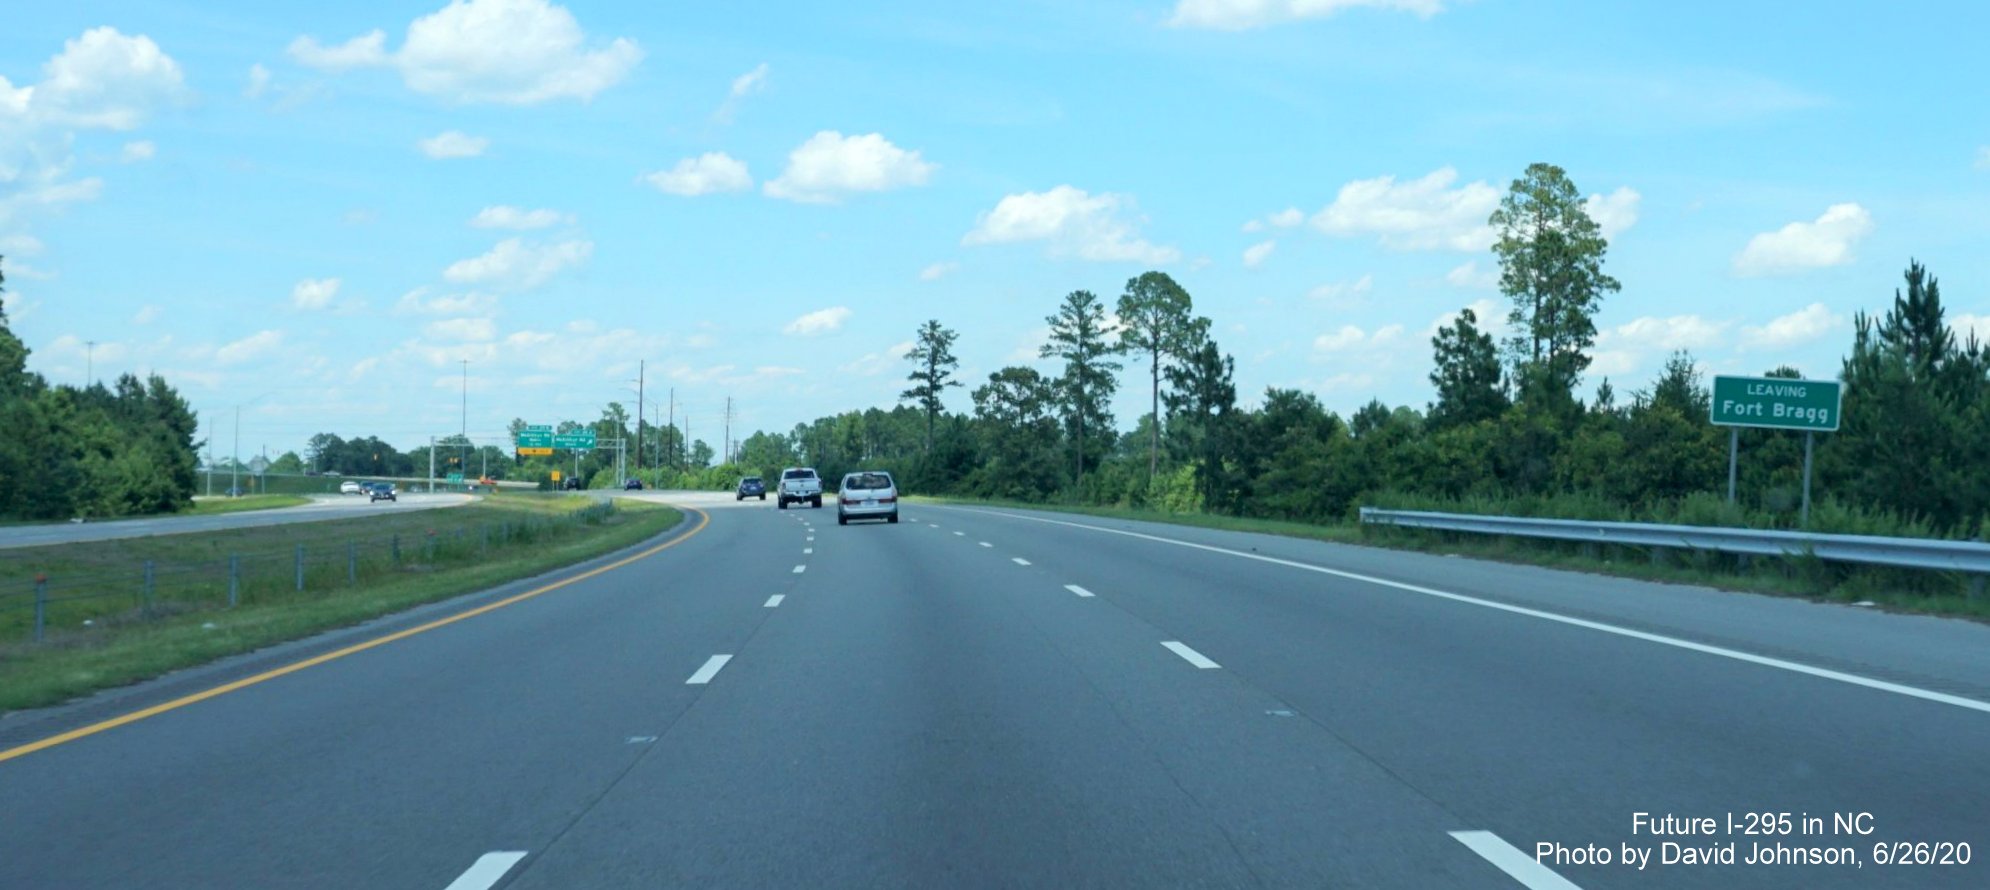 Image of the ground mounted guide sign for Leaving Fort Bragg on I-295 North in Fayetteville, by David Johnson June 2020